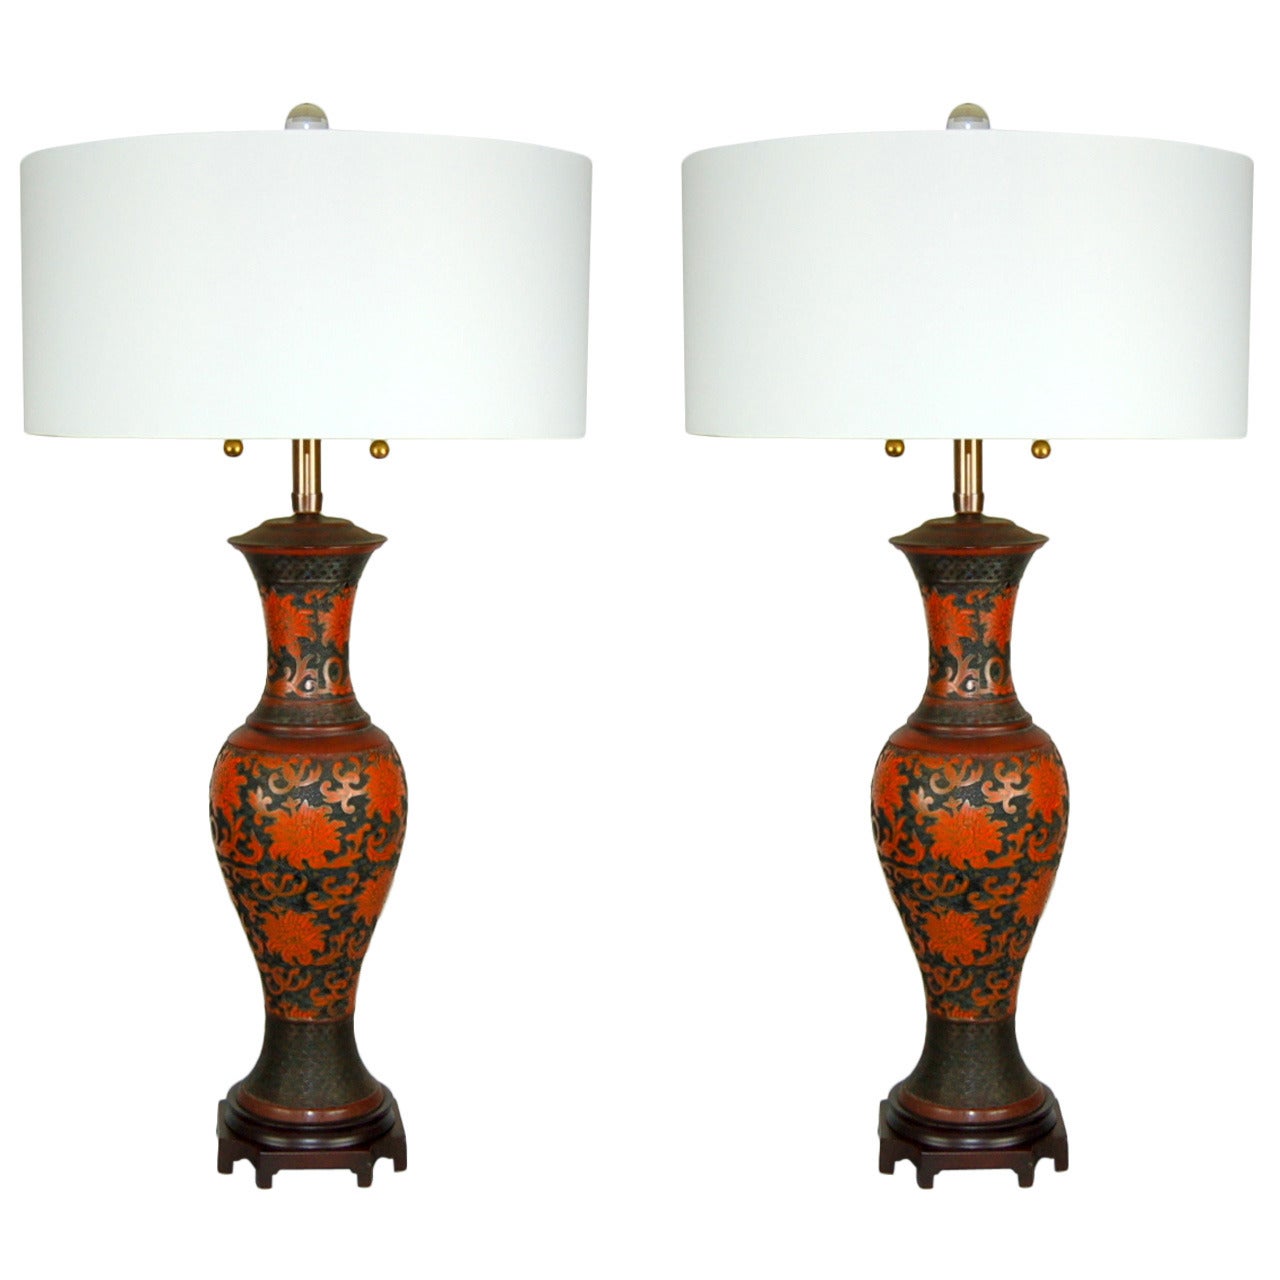 Matched Pair of Vintage Cloisonné Brass Lamps in Vermillion by Marbro For Sale